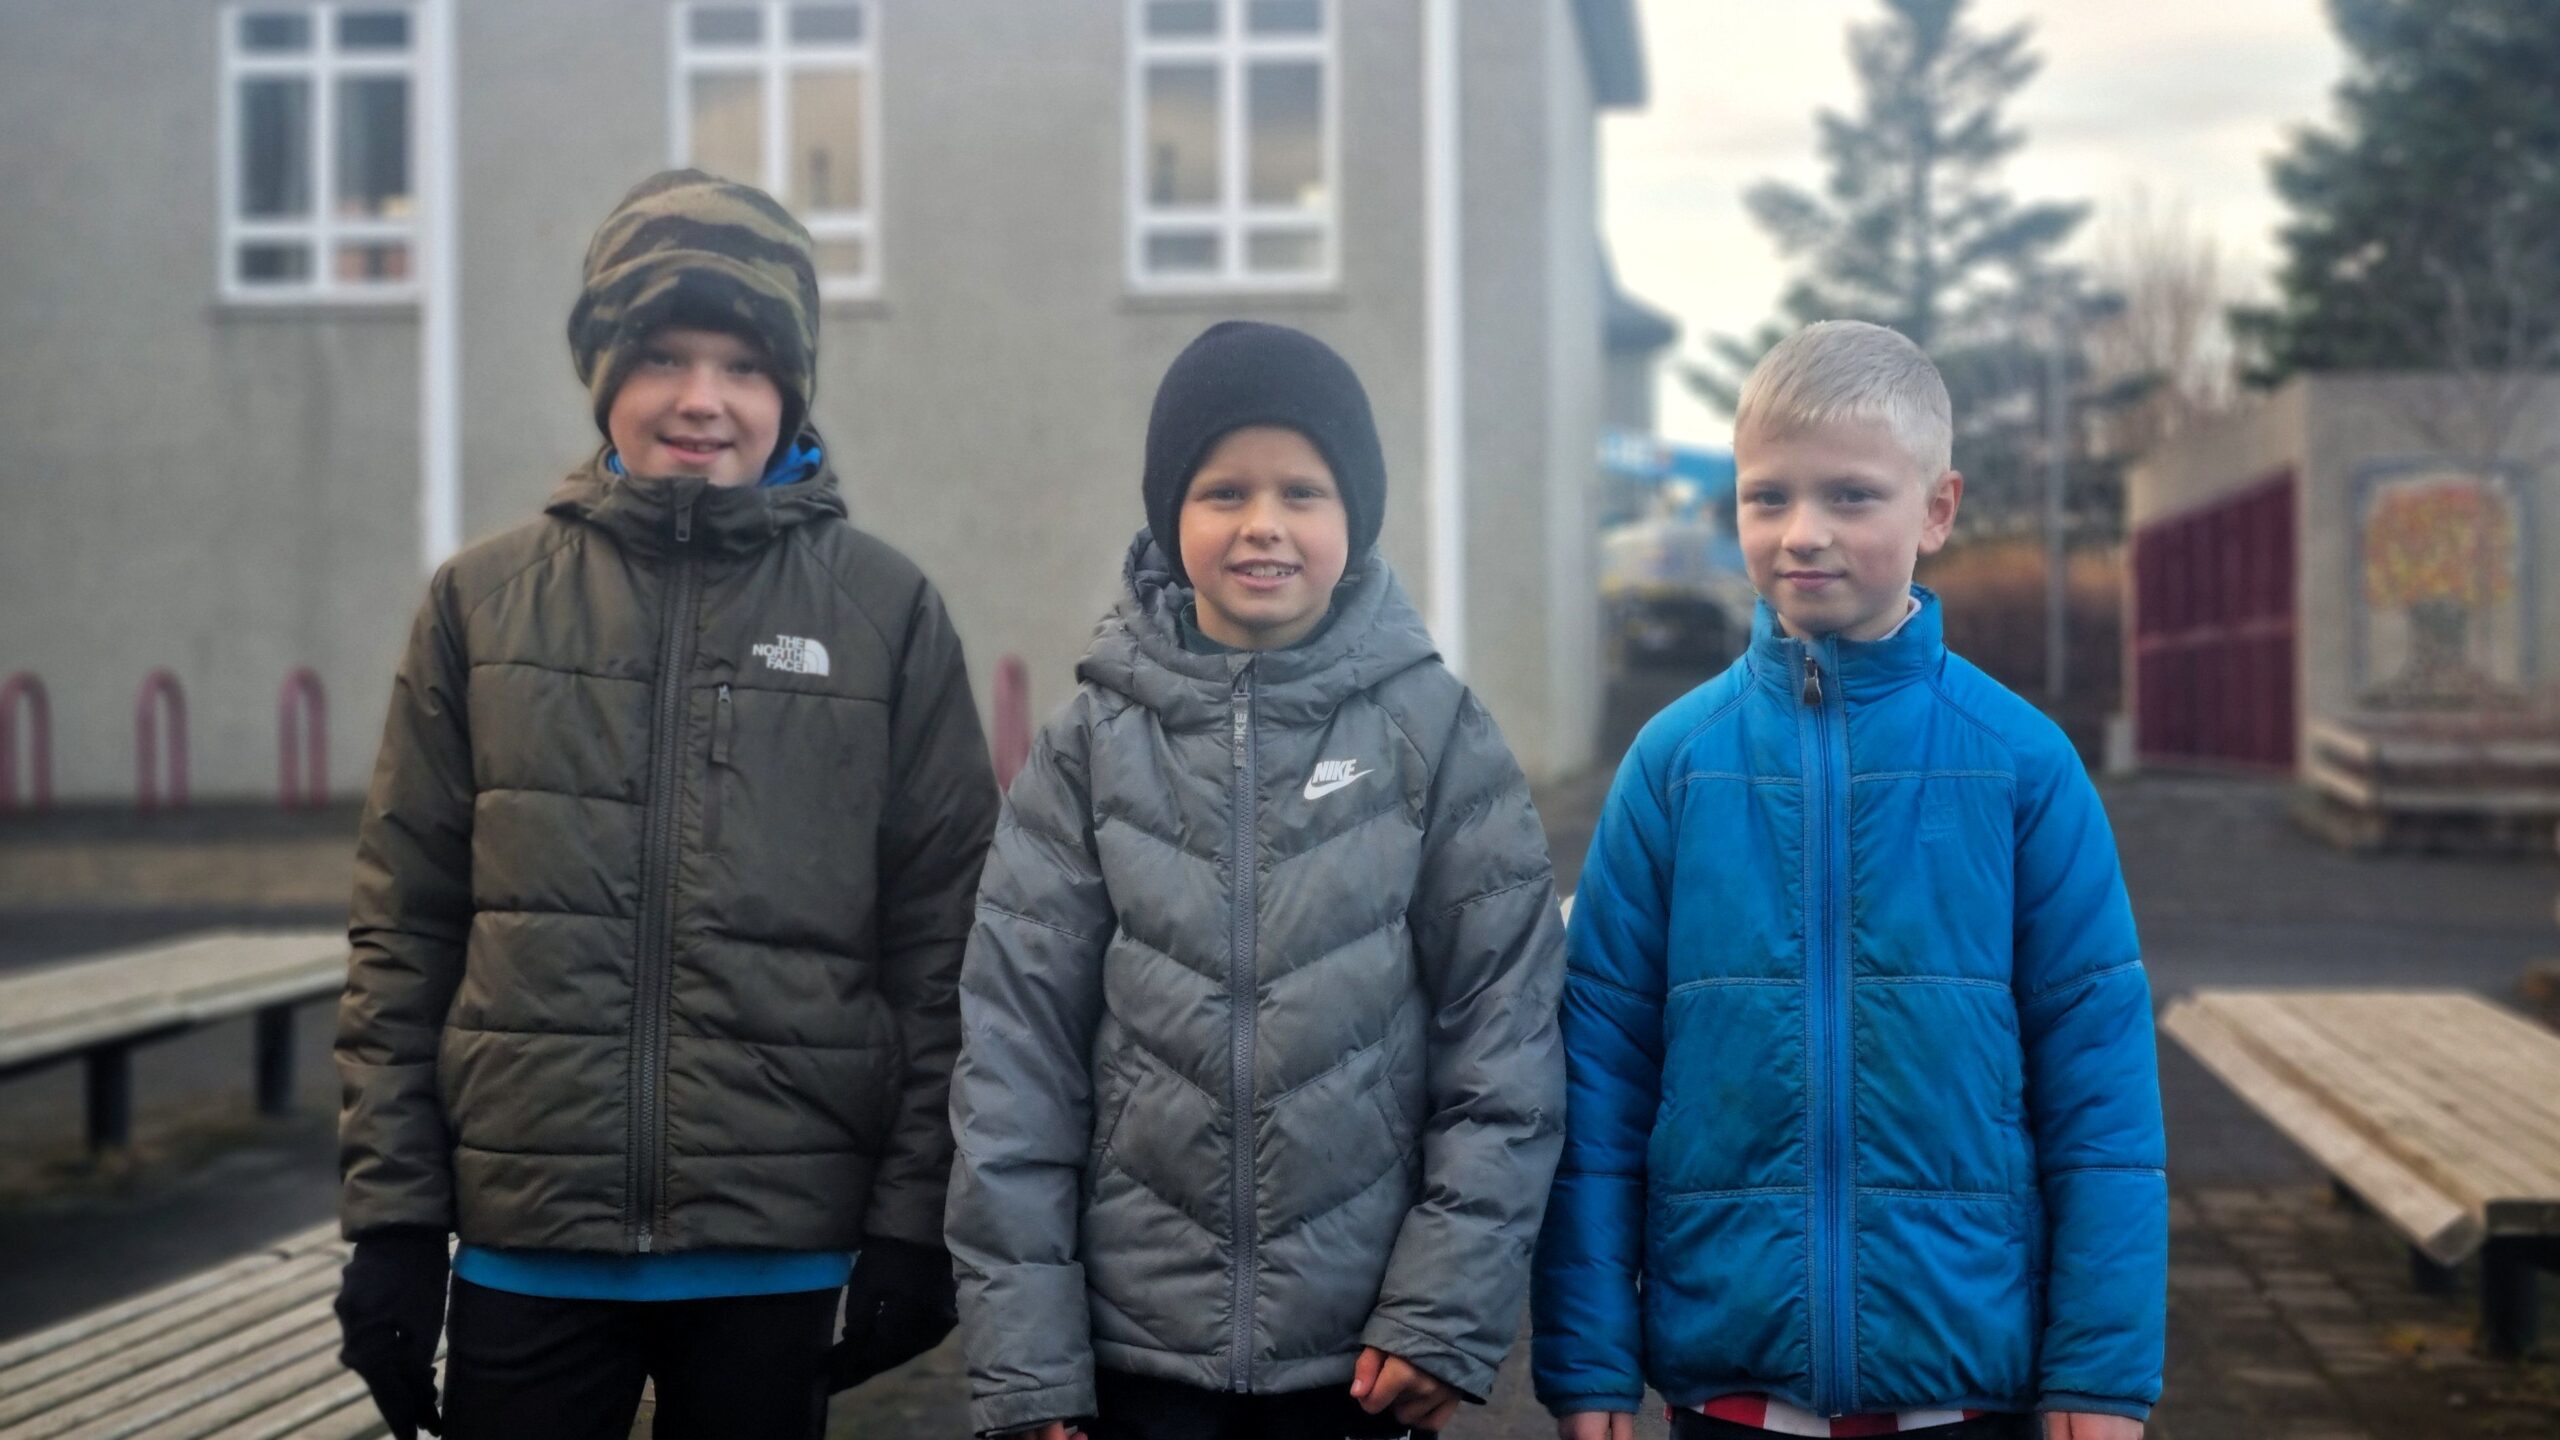 They collect cans to give teddy bears to the children of Grindavík